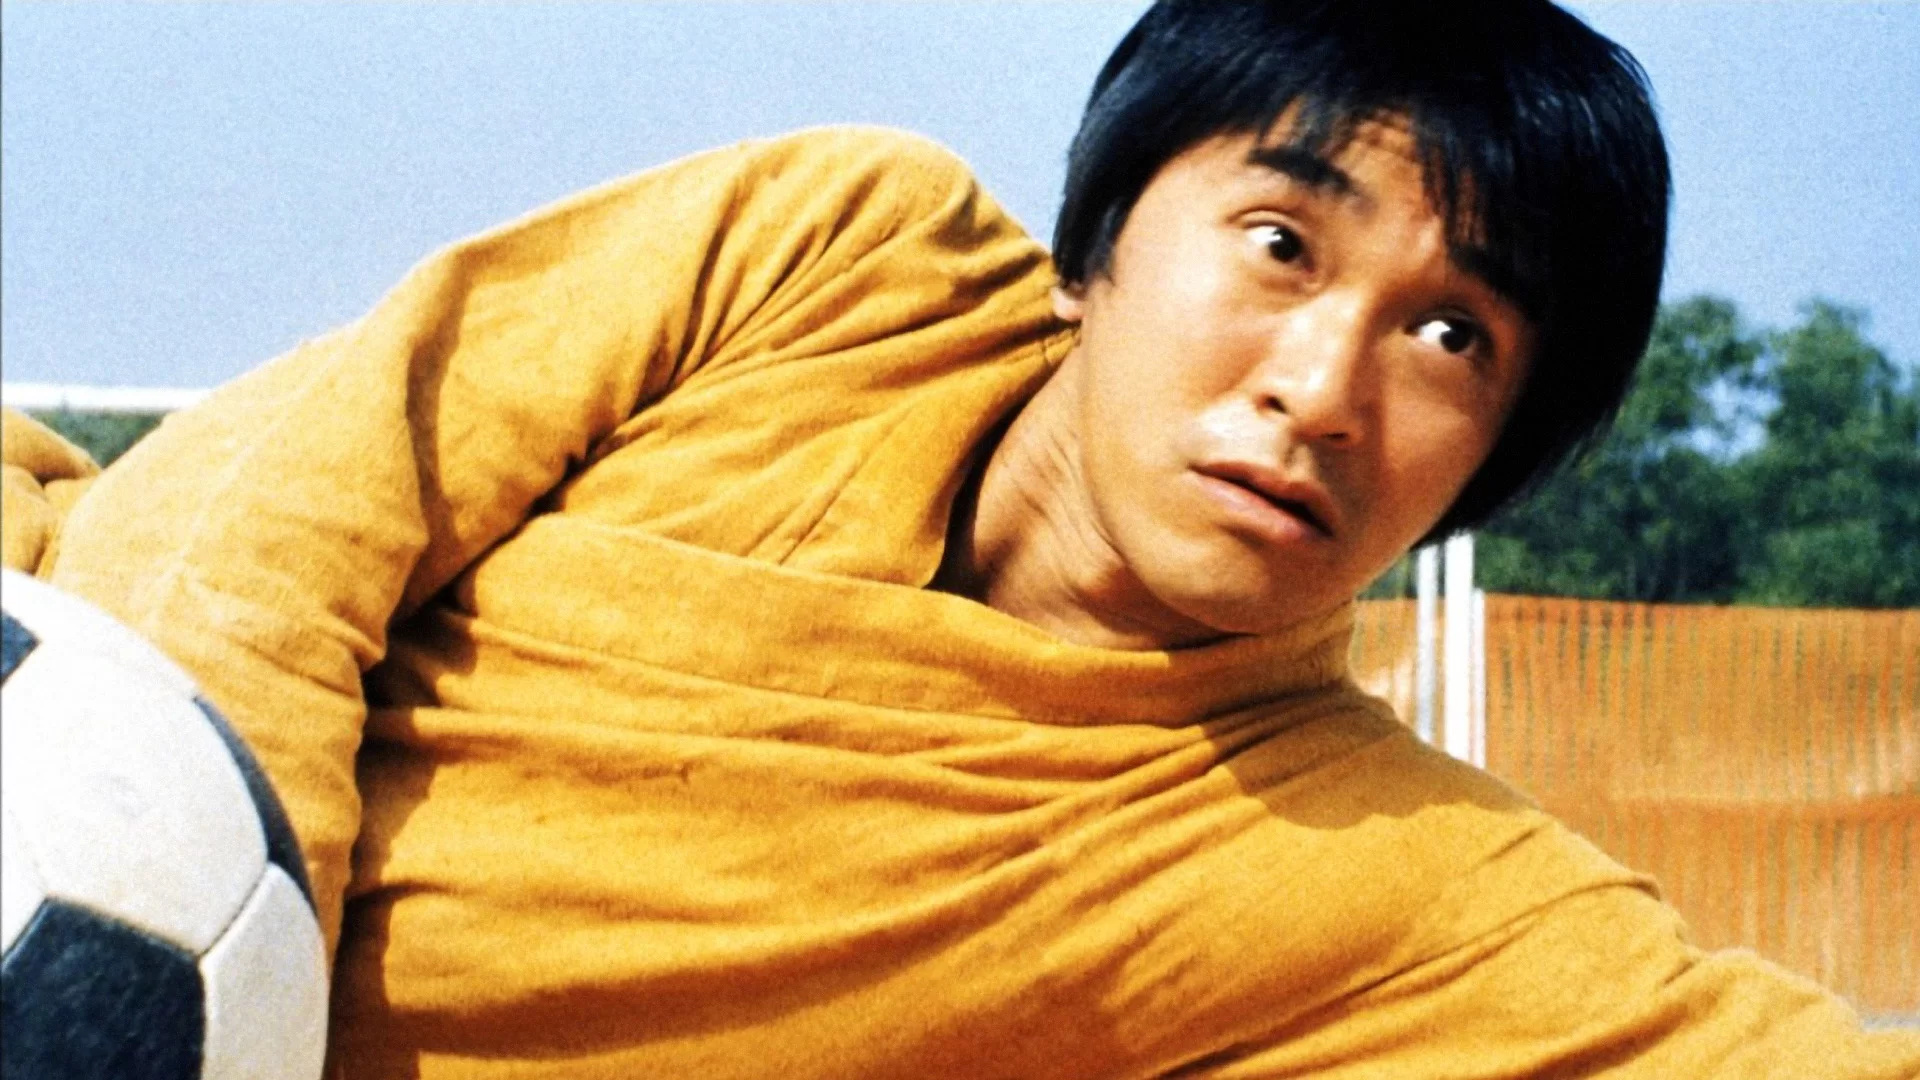 Shaolin Soccer: Stephen Chow, Shot to stardom in The Final Combat, 1989. 1920x1080 Full HD Wallpaper.